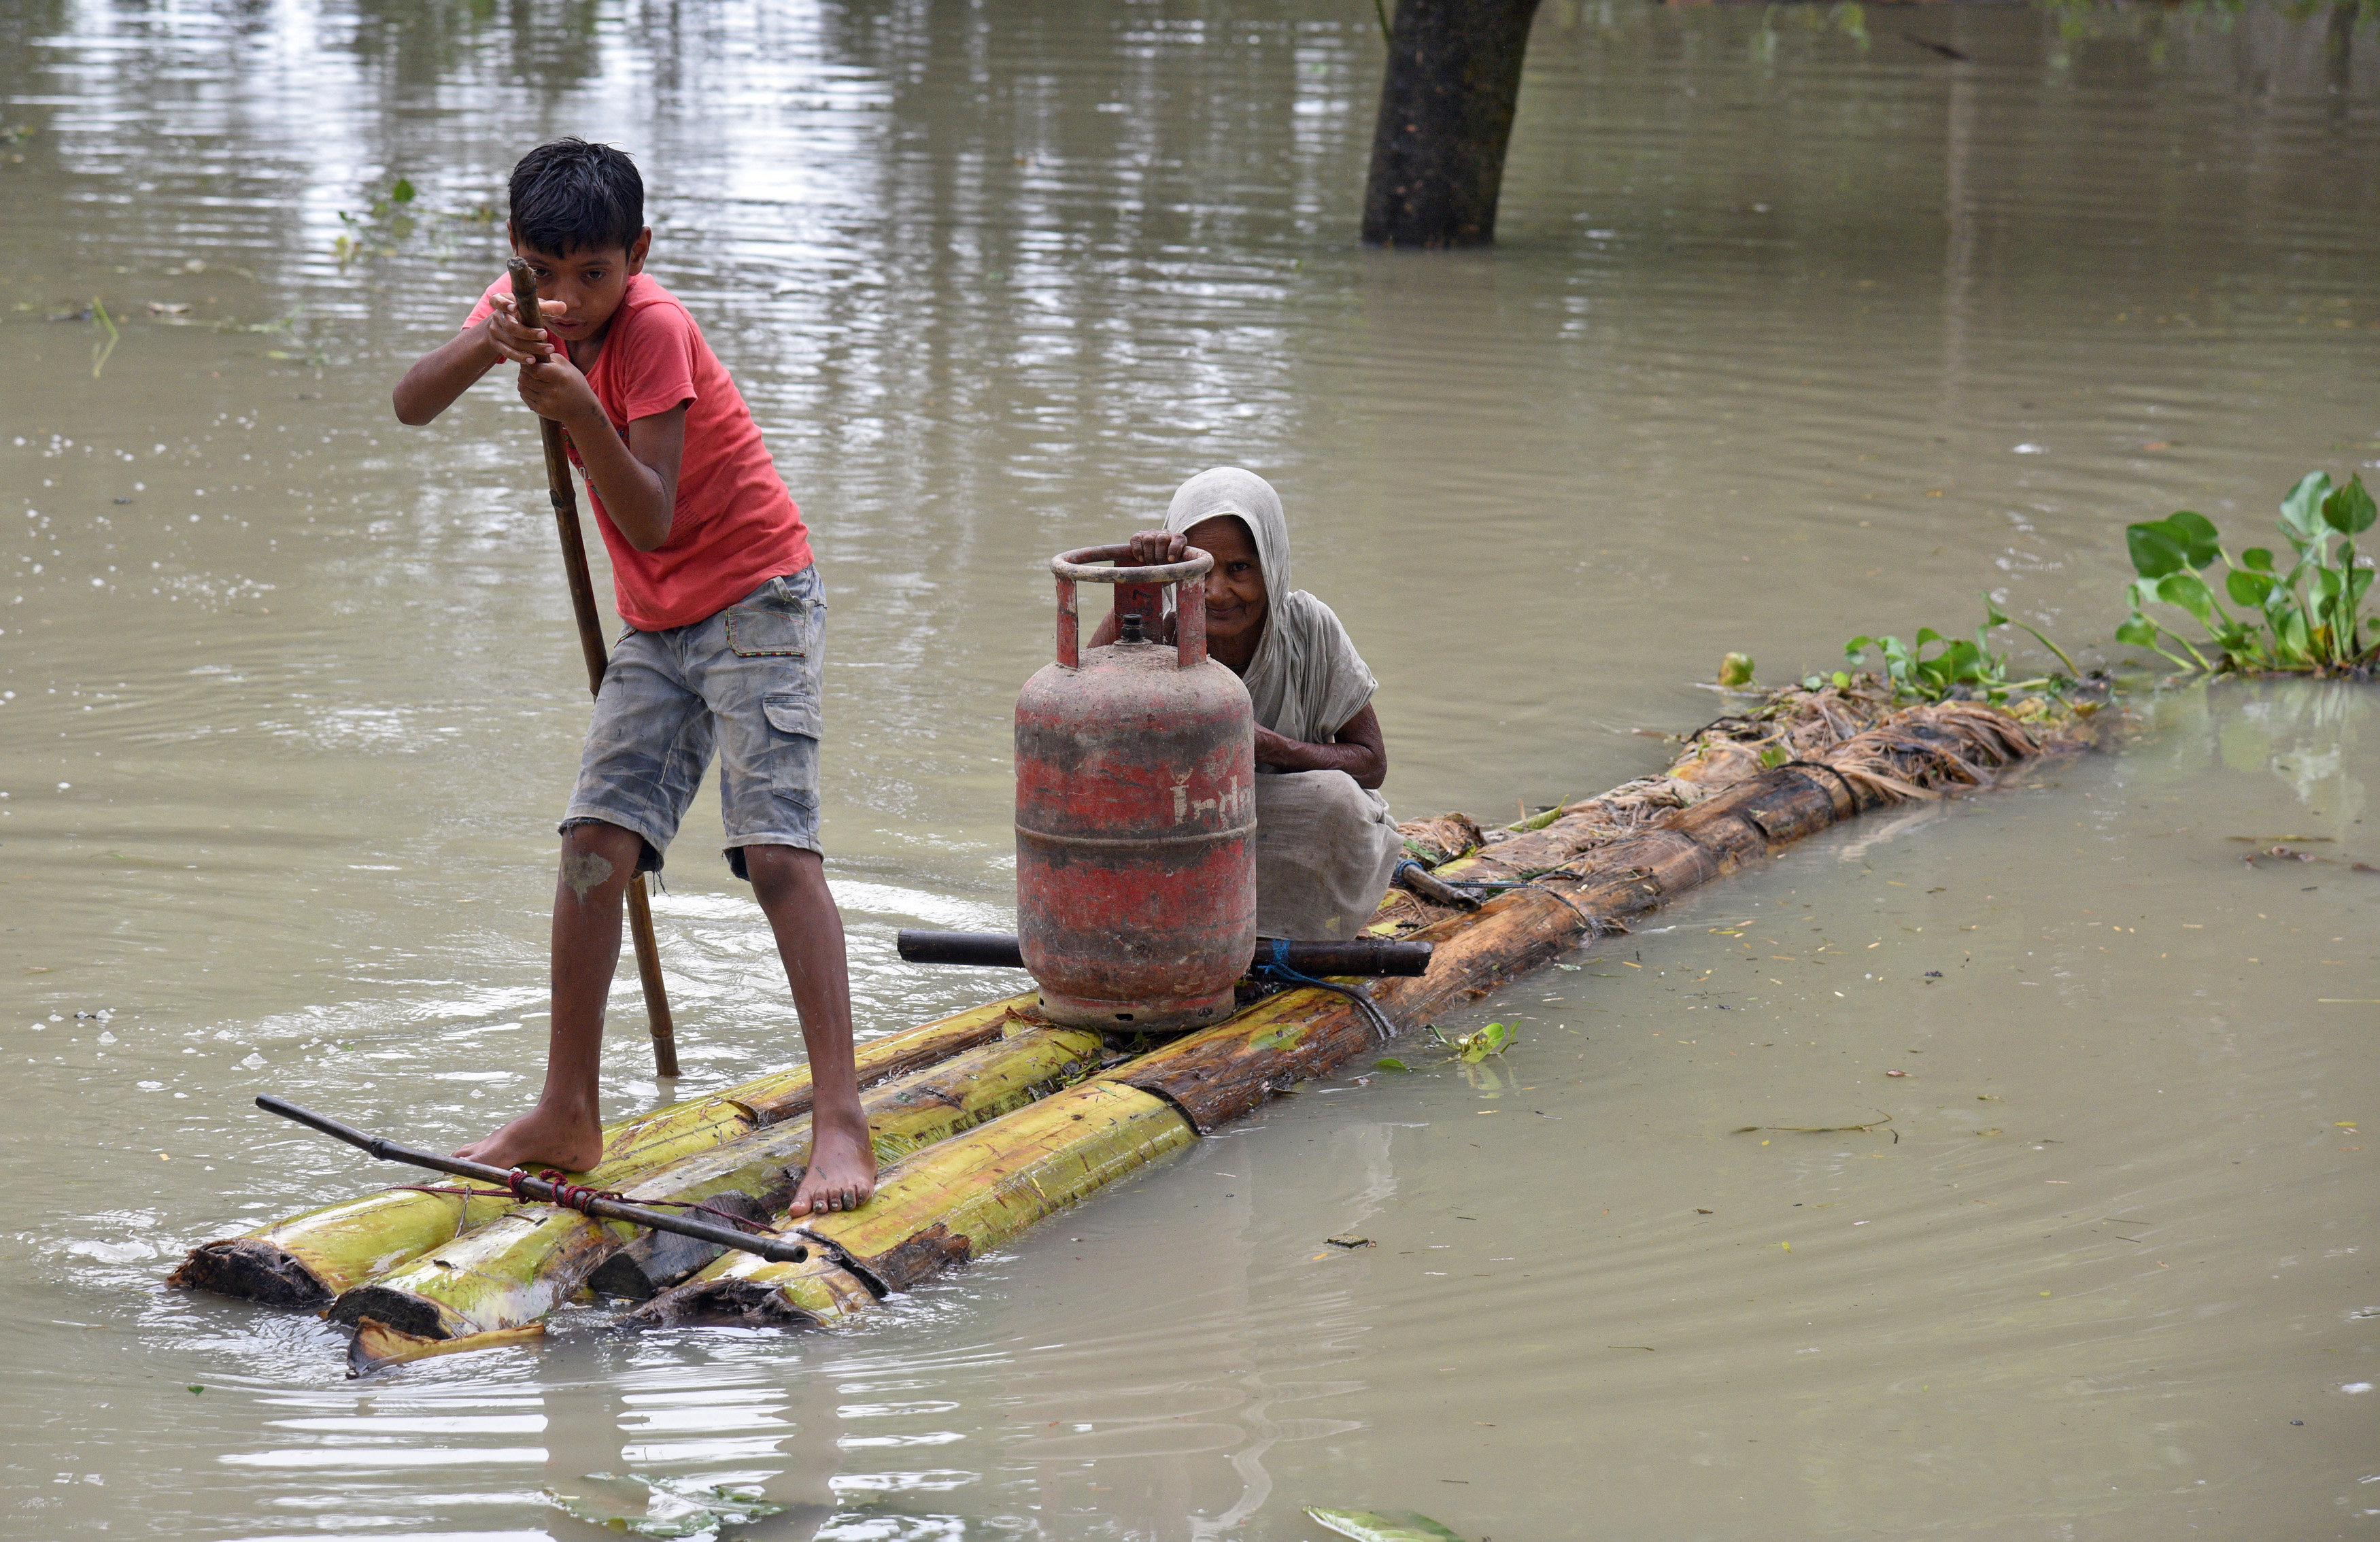 In pictures: Floods across South Asia cause loss of life, property